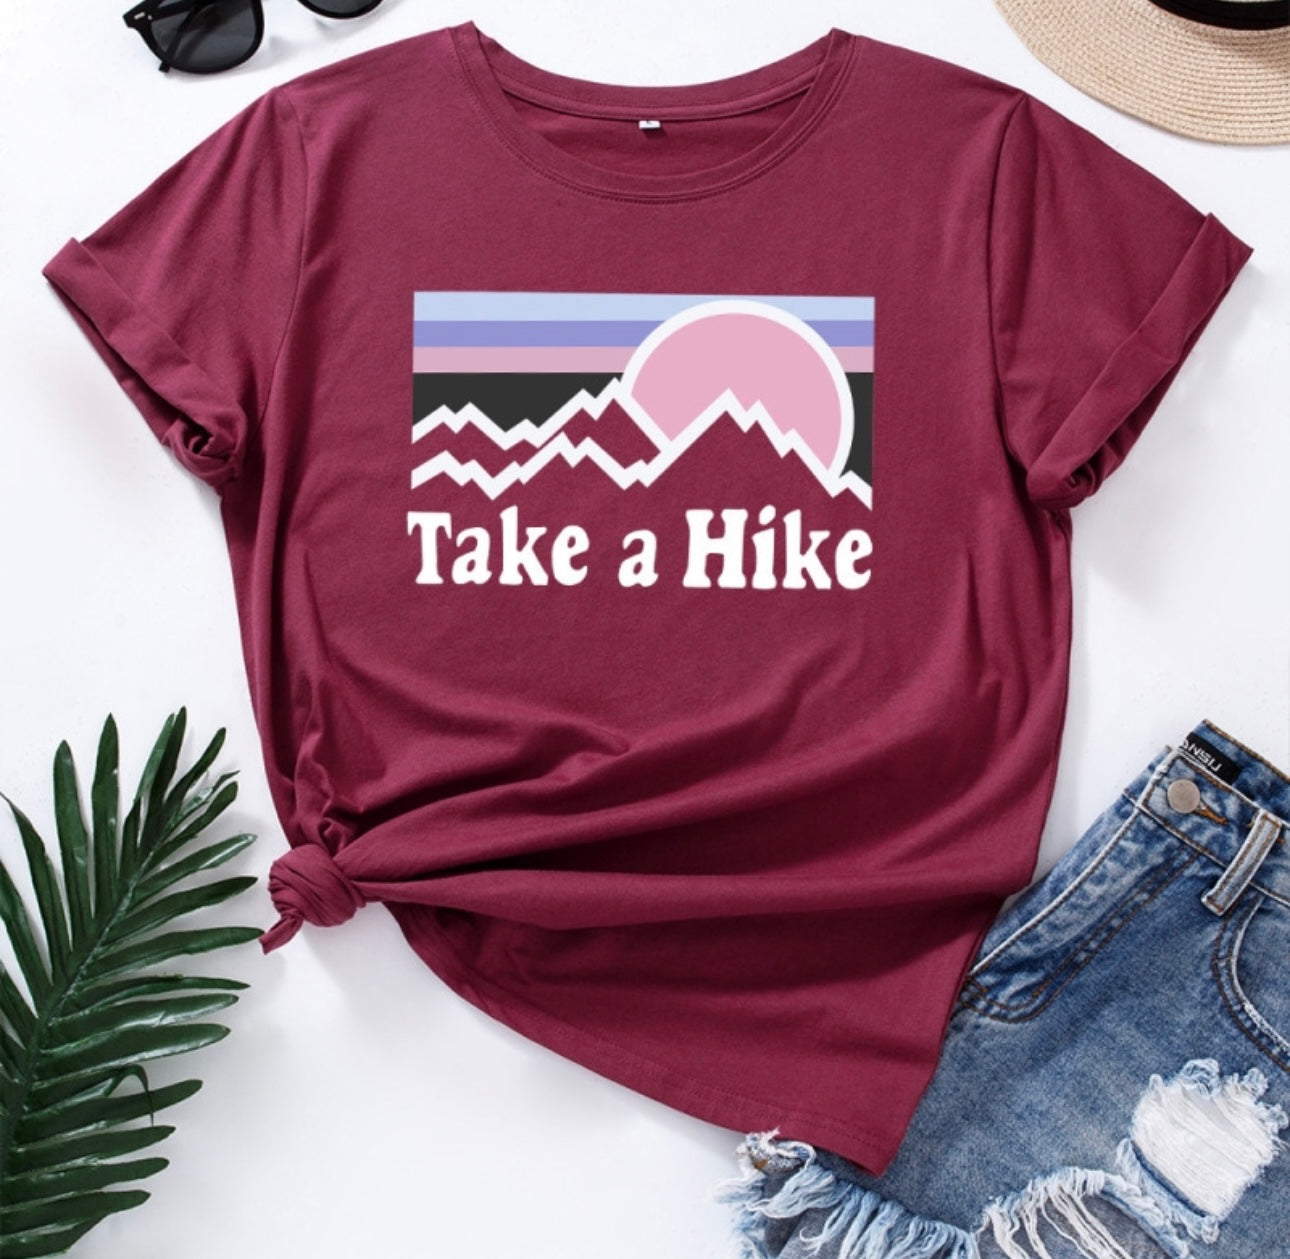 “Take A Hike” (Catchy Graphic Tee)